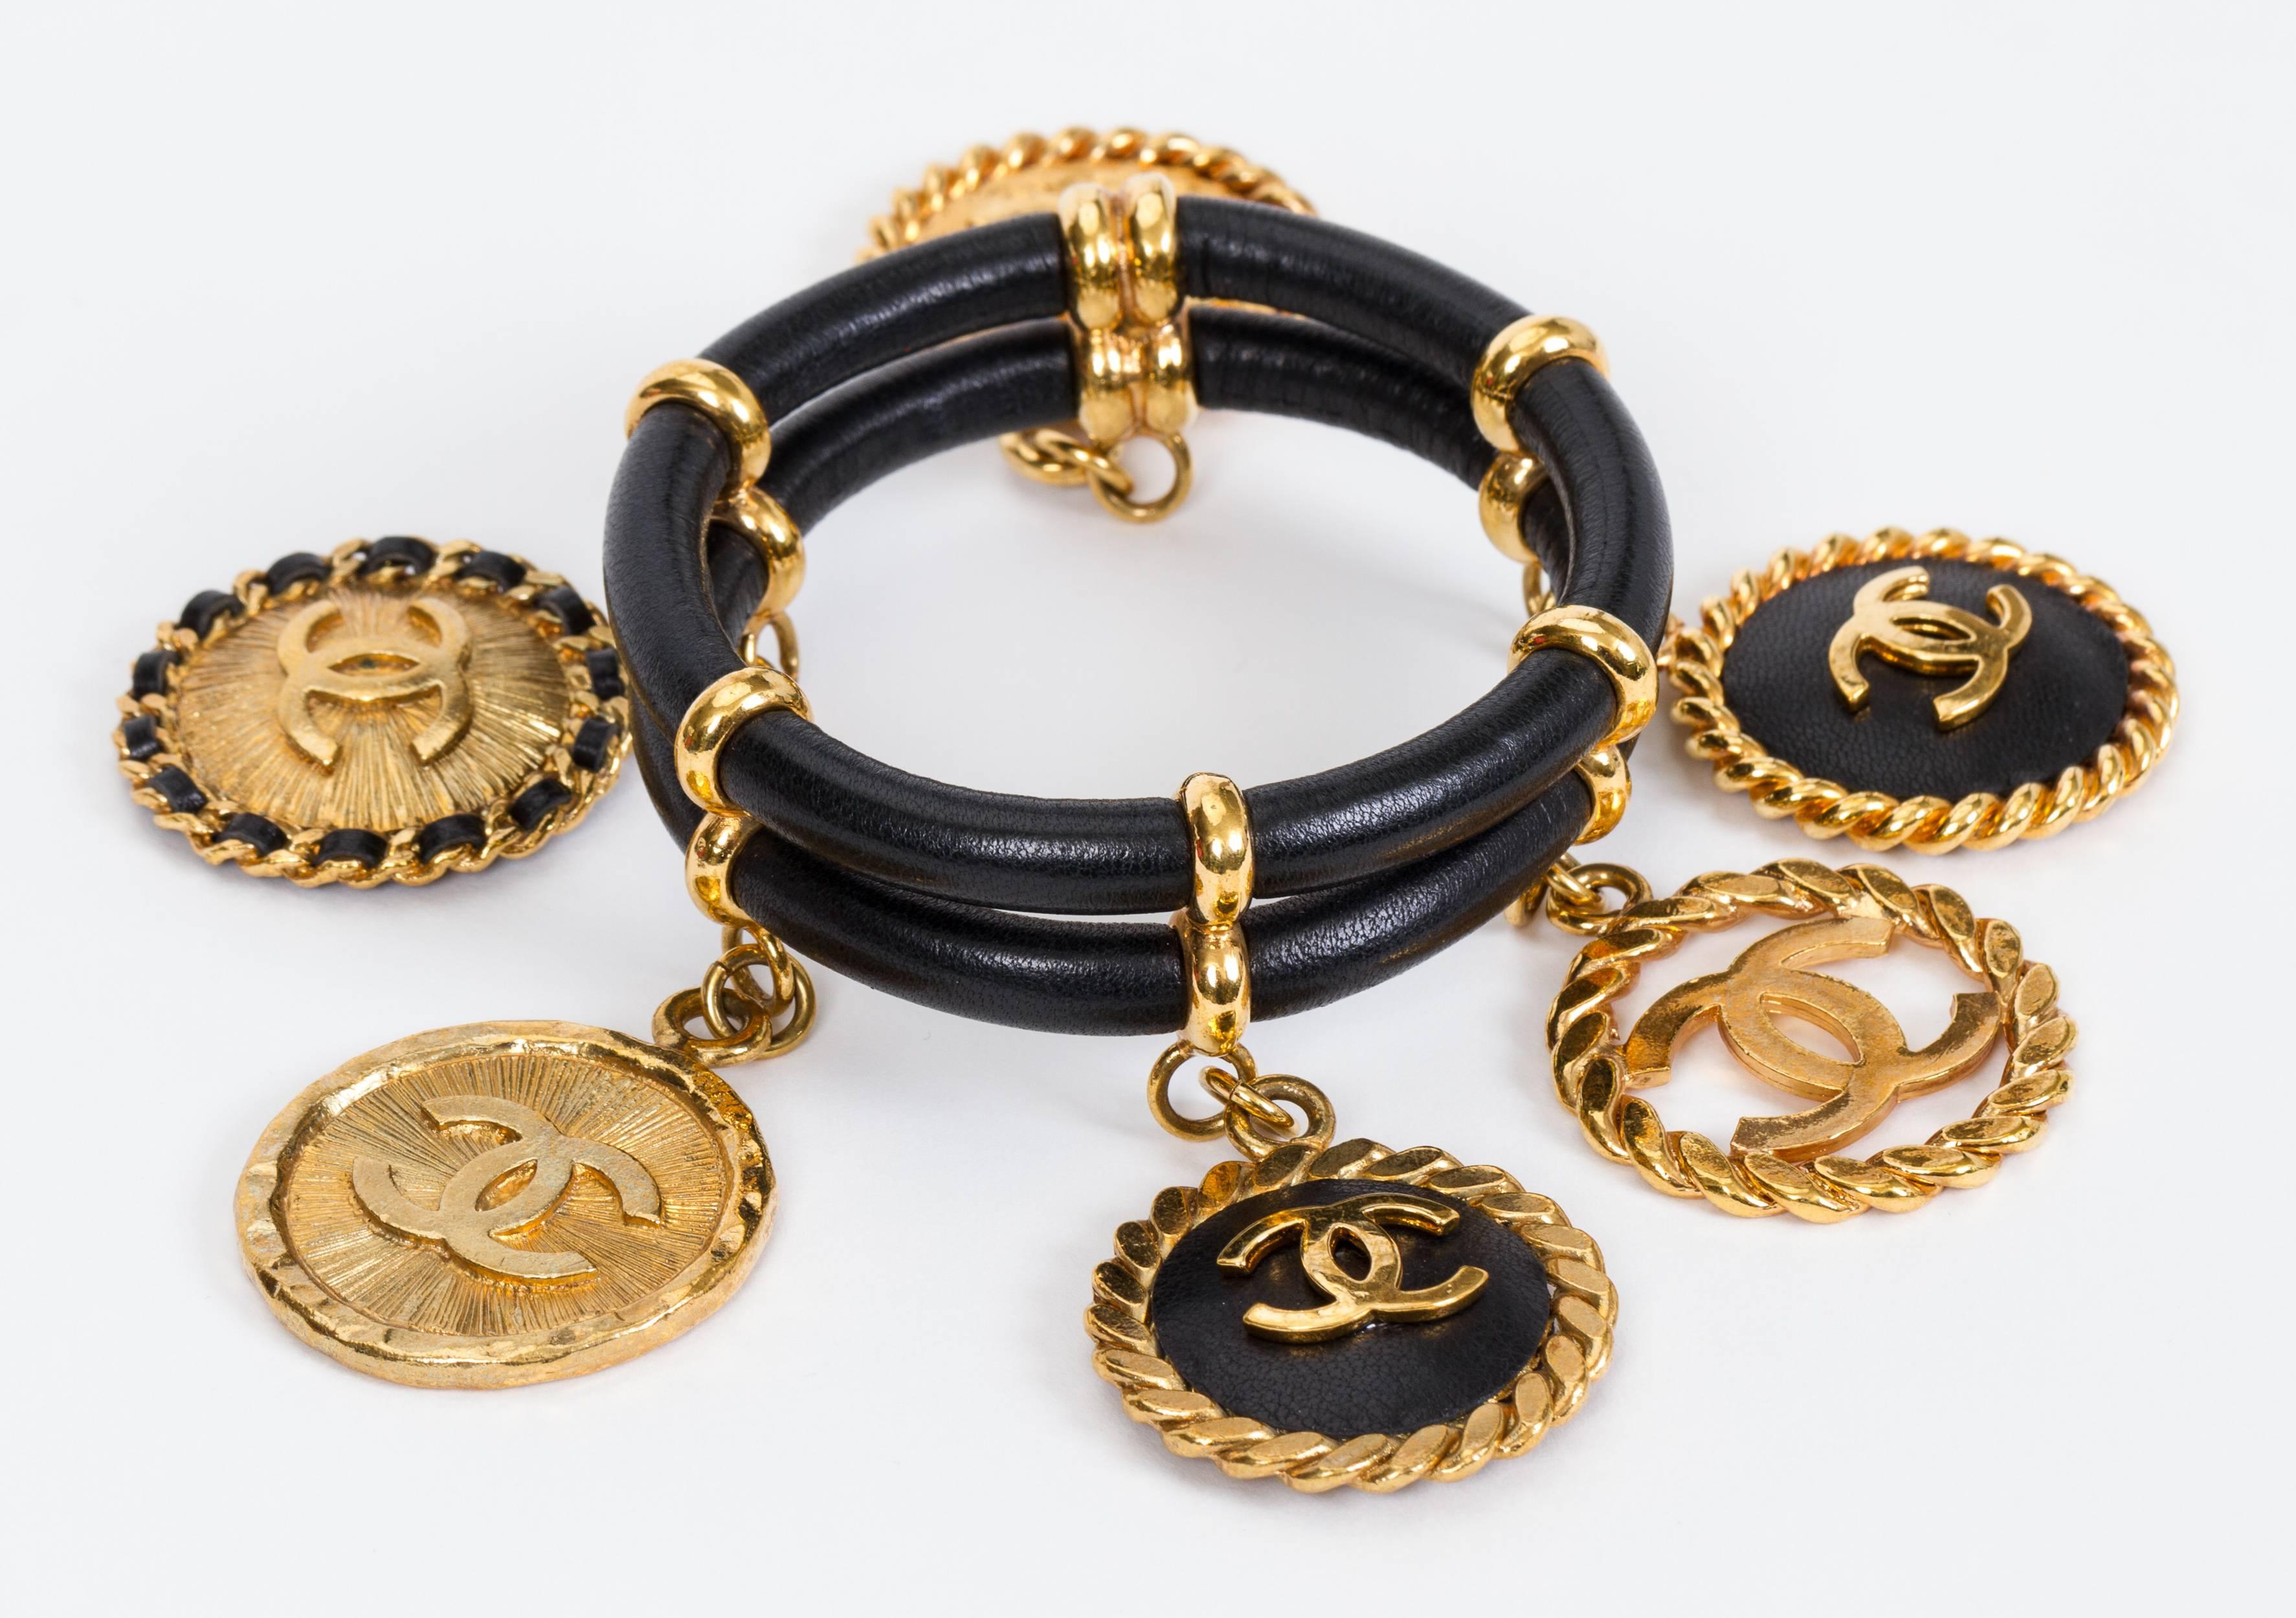 Chanel rare and collectible leather and gold metal charm bracelet from mid 80s. Designed by iconic Victoire de Castellaine. Charms measure 1.5